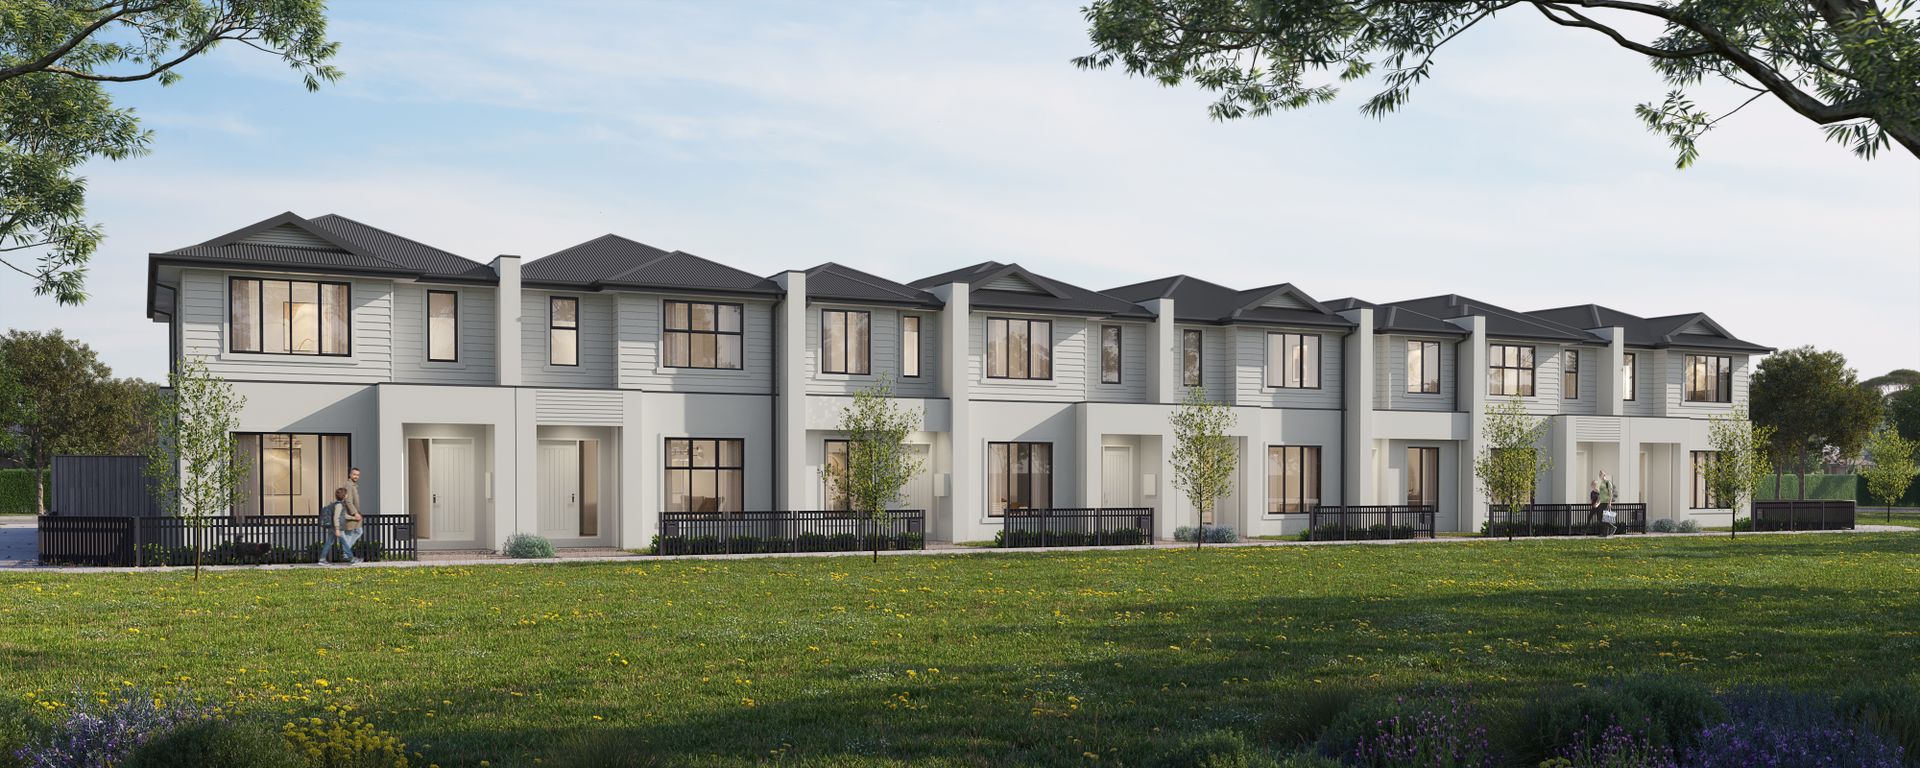 Octave 18 Townhome by Homebuyers Centre, Tarneit VIC 3029, Image 1